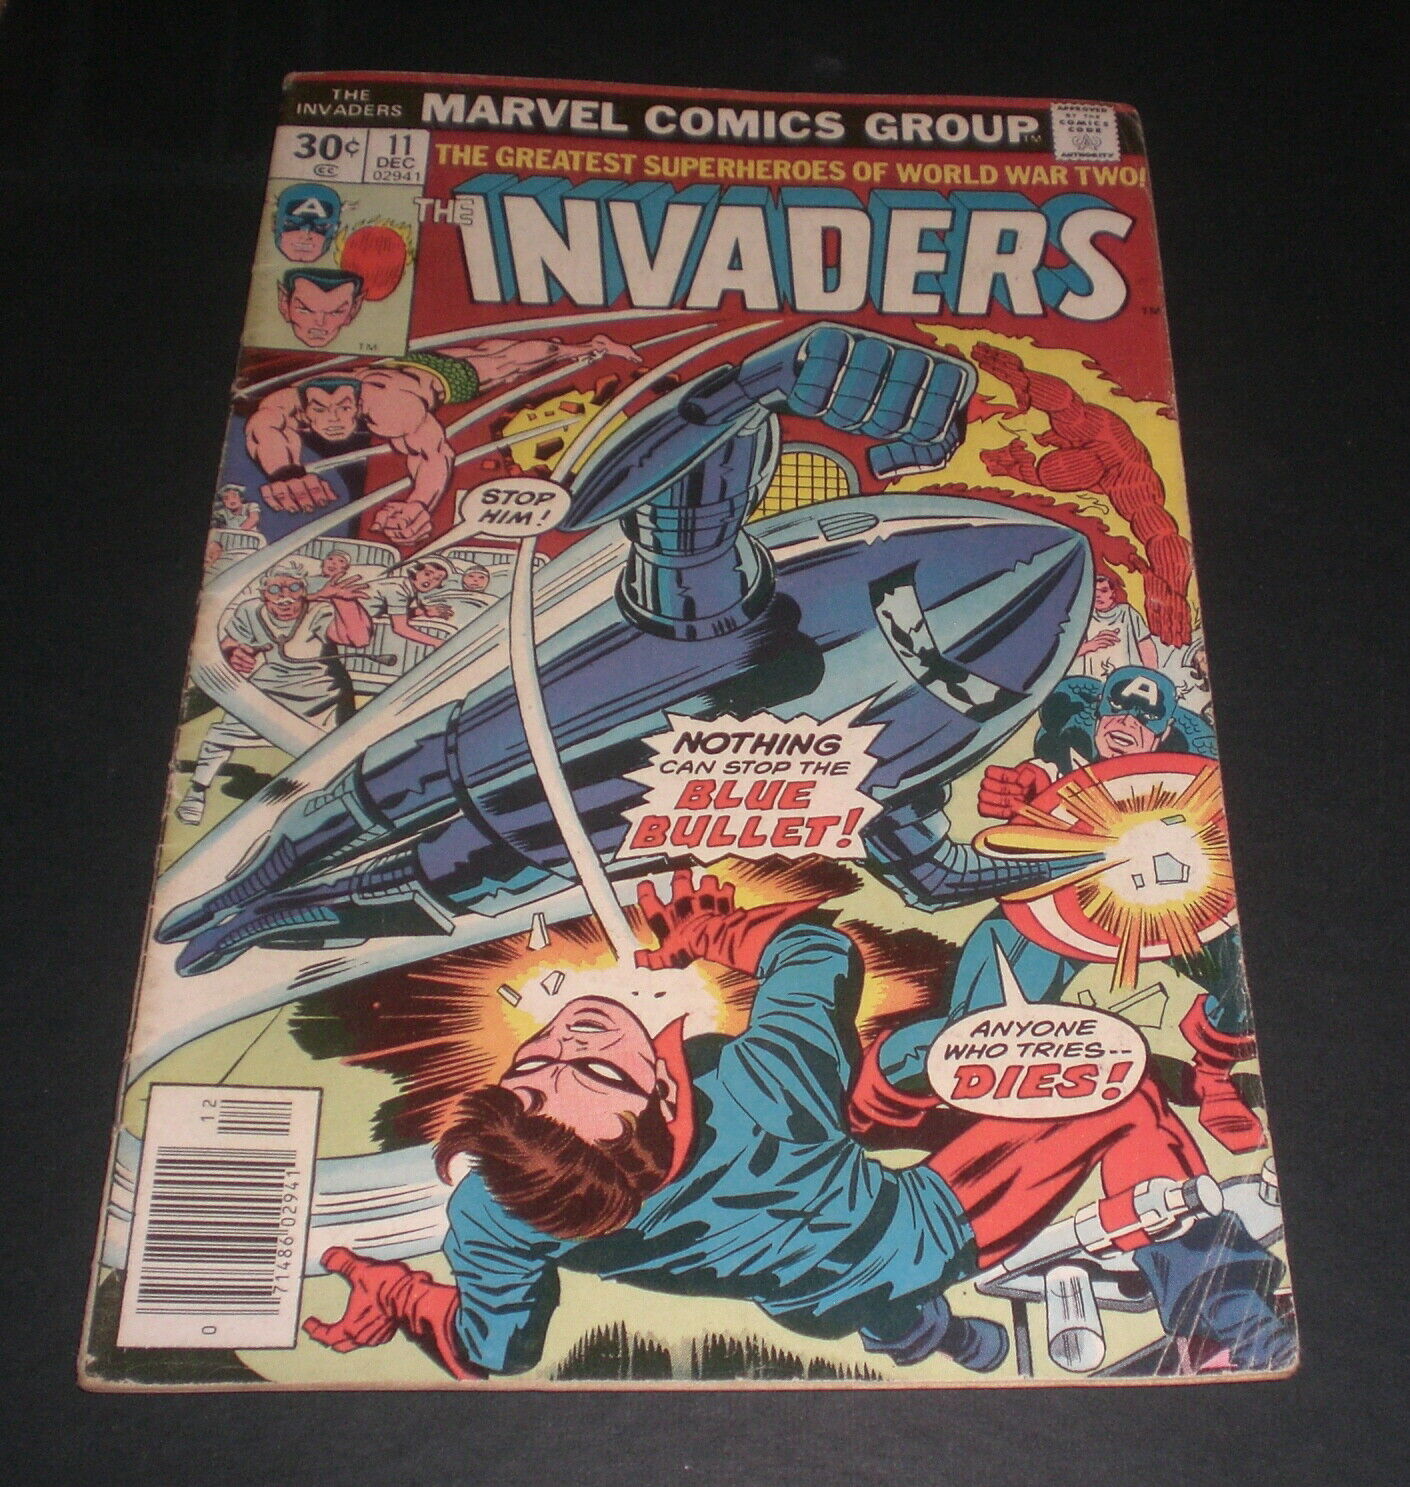 THE INVADERS MARVEL COMIC BOOK - YOUR CHOICE $6 EACH